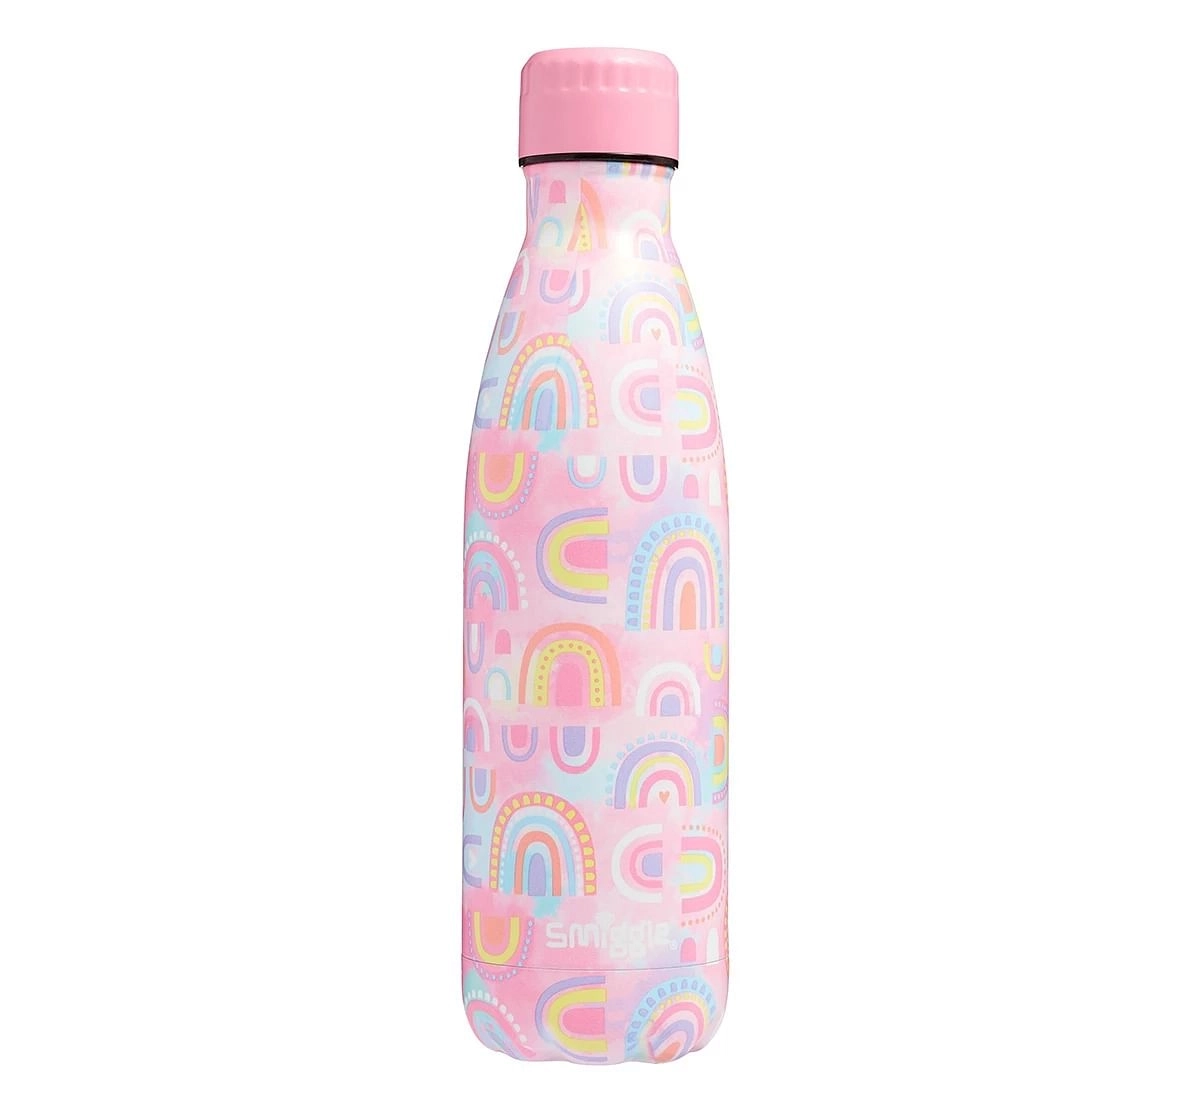 Smiggle Bright Side Insulated Stainless Steel Wonder Drink Bottle 500ml for Kids 3Y+, Pink